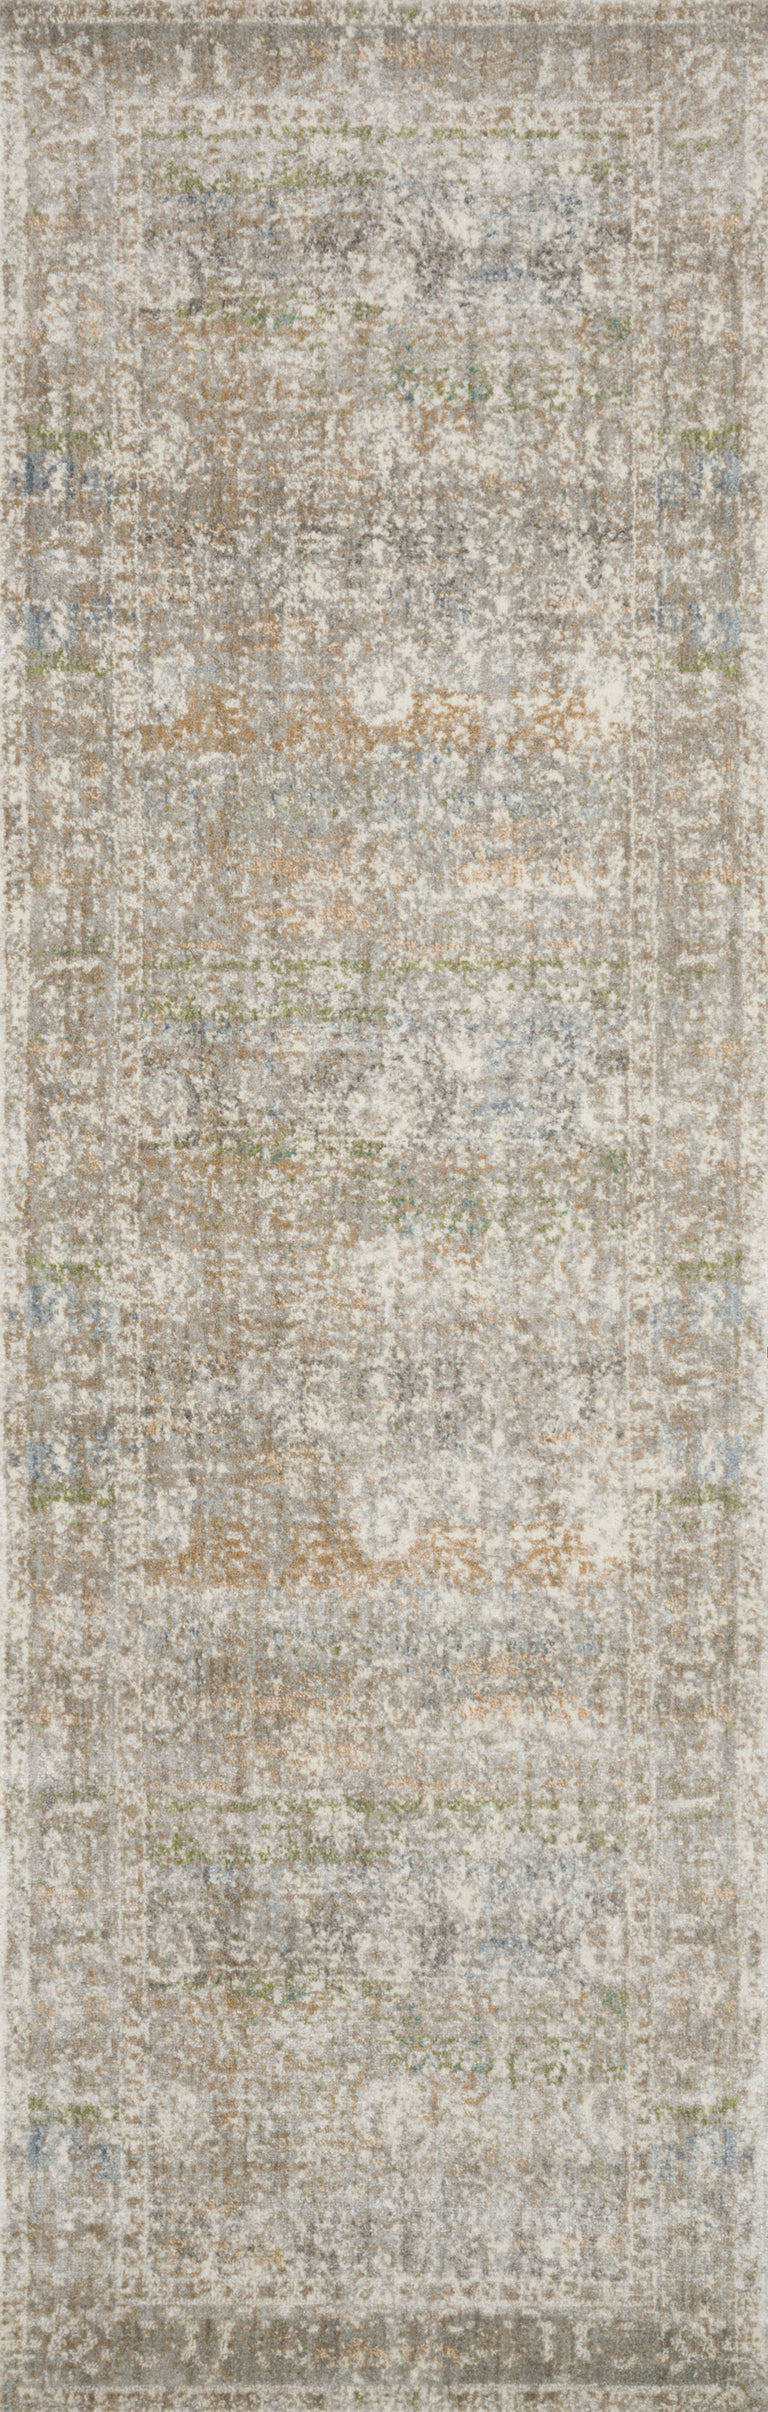 Loloi Rugs Anastasia Collection Rug in Grey, Multi - 9'6" x 13'